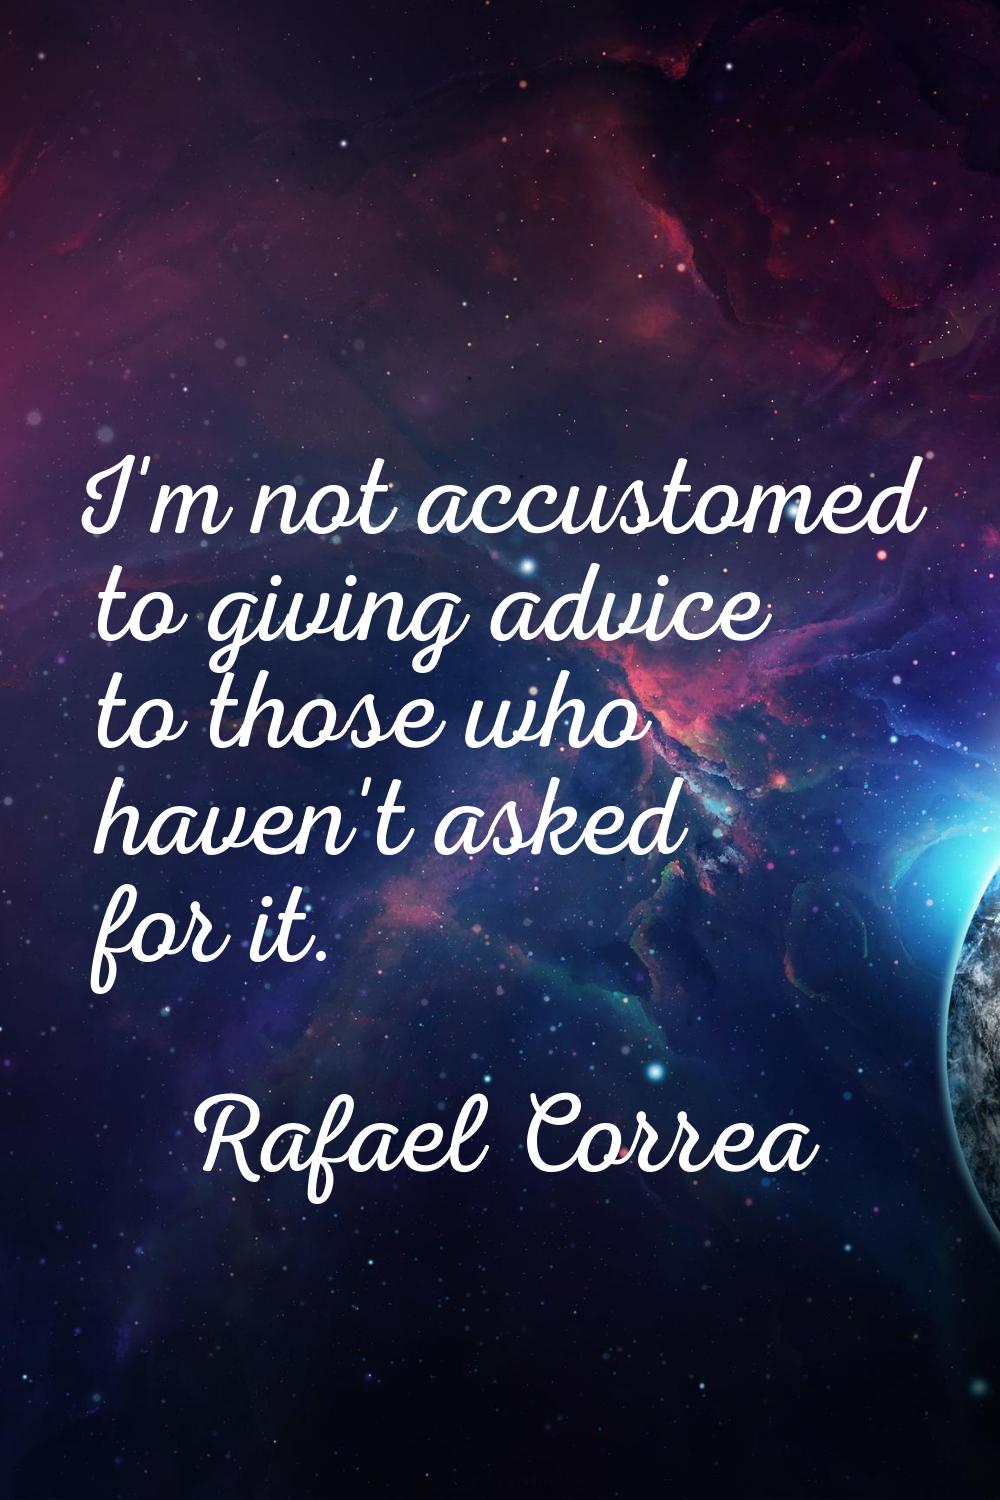 I'm not accustomed to giving advice to those who haven't asked for it.